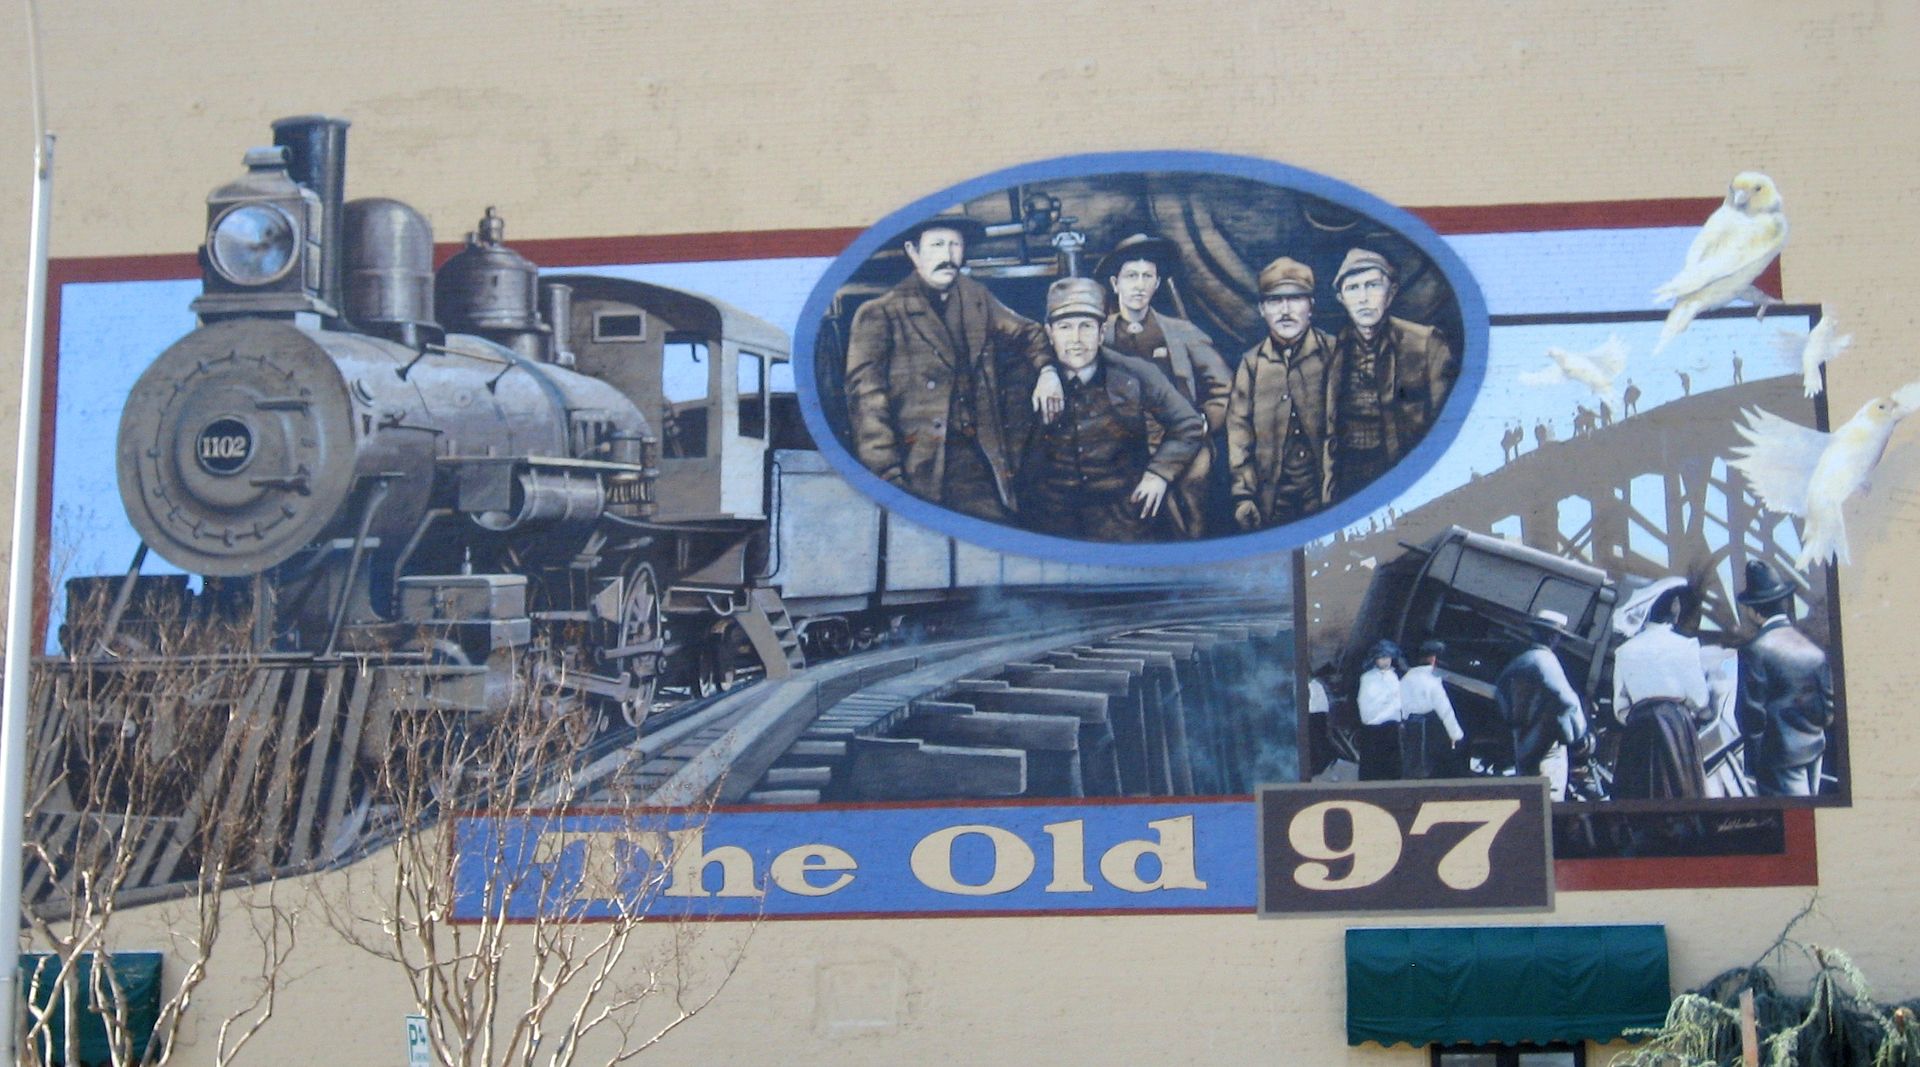 Wreck of the Old 97 is commemorated with this mural in downtown Danville.